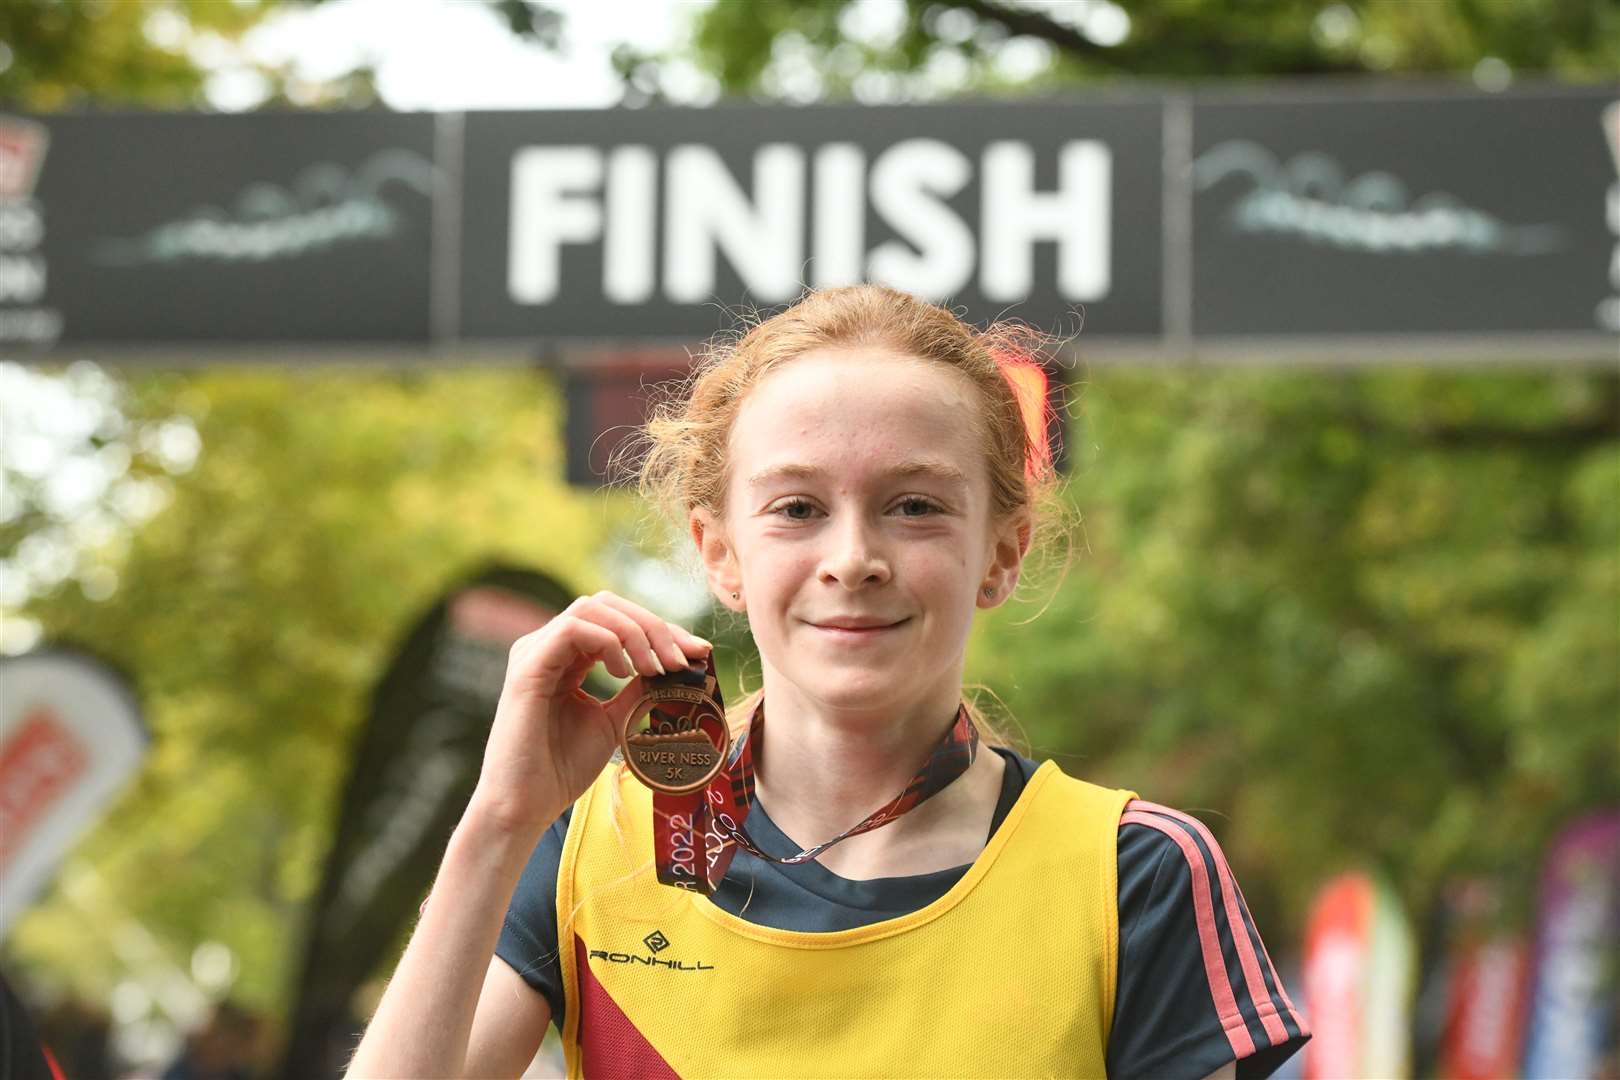 Lois Macrae came first in the 5k. Picture: James Mackenzie.